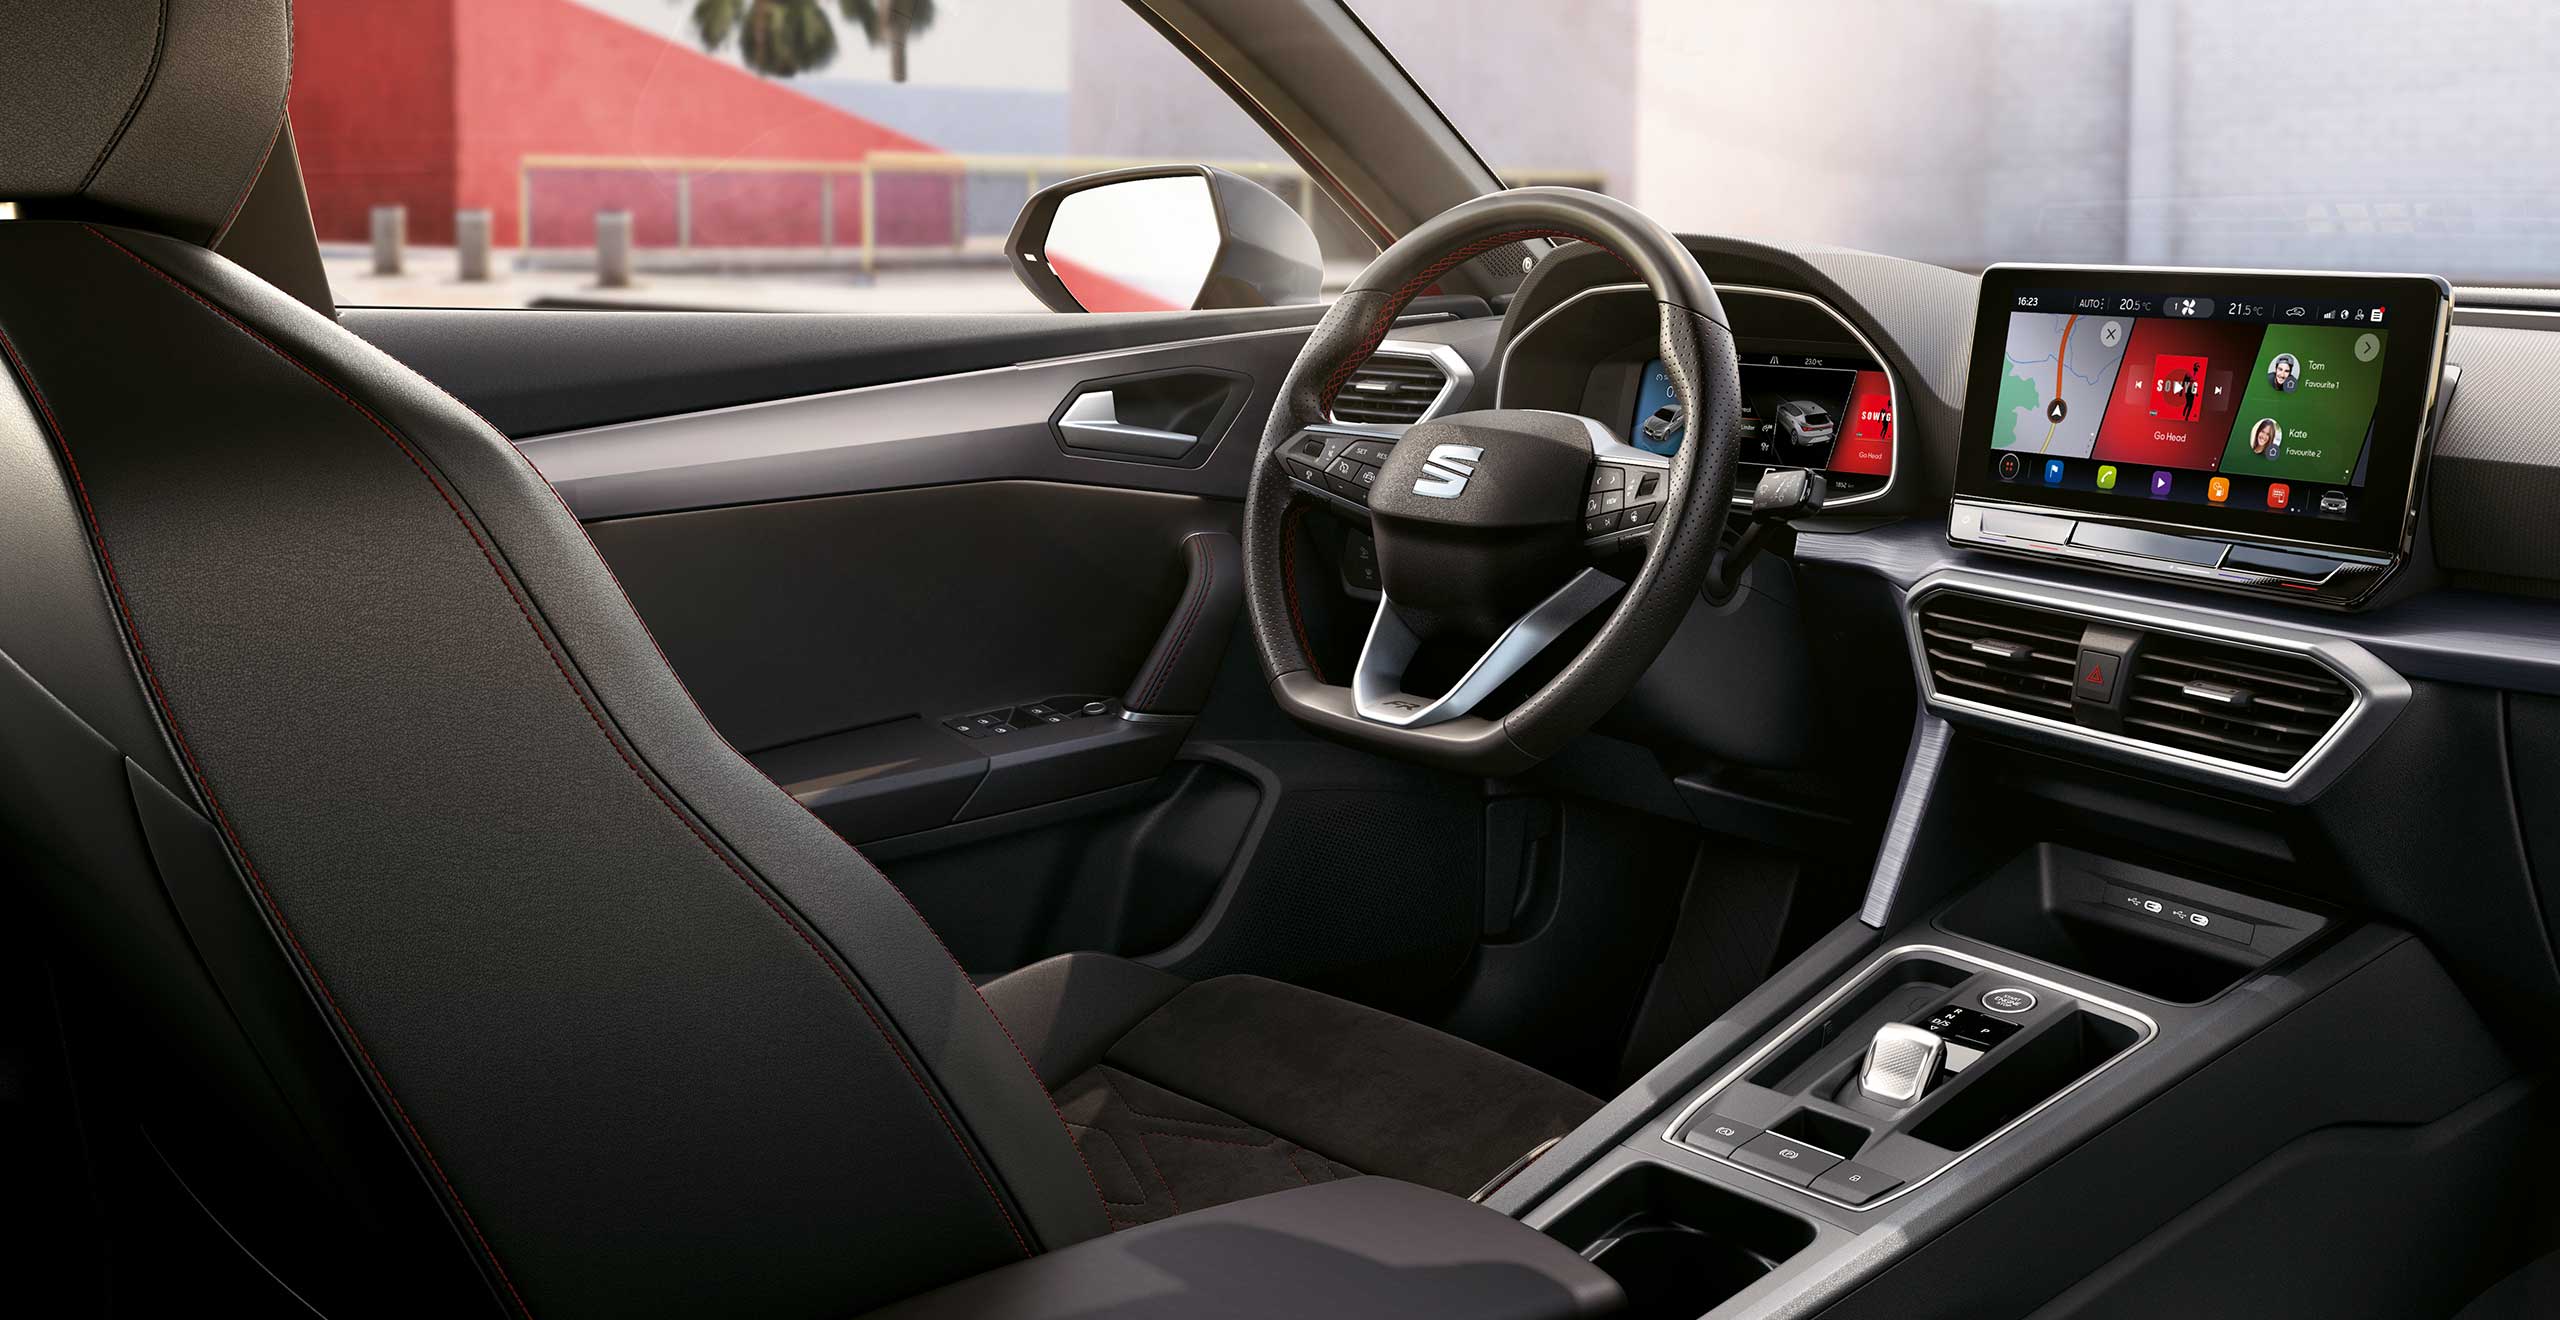 SEAT Leon interior view with steering wheel and infotainment screen 